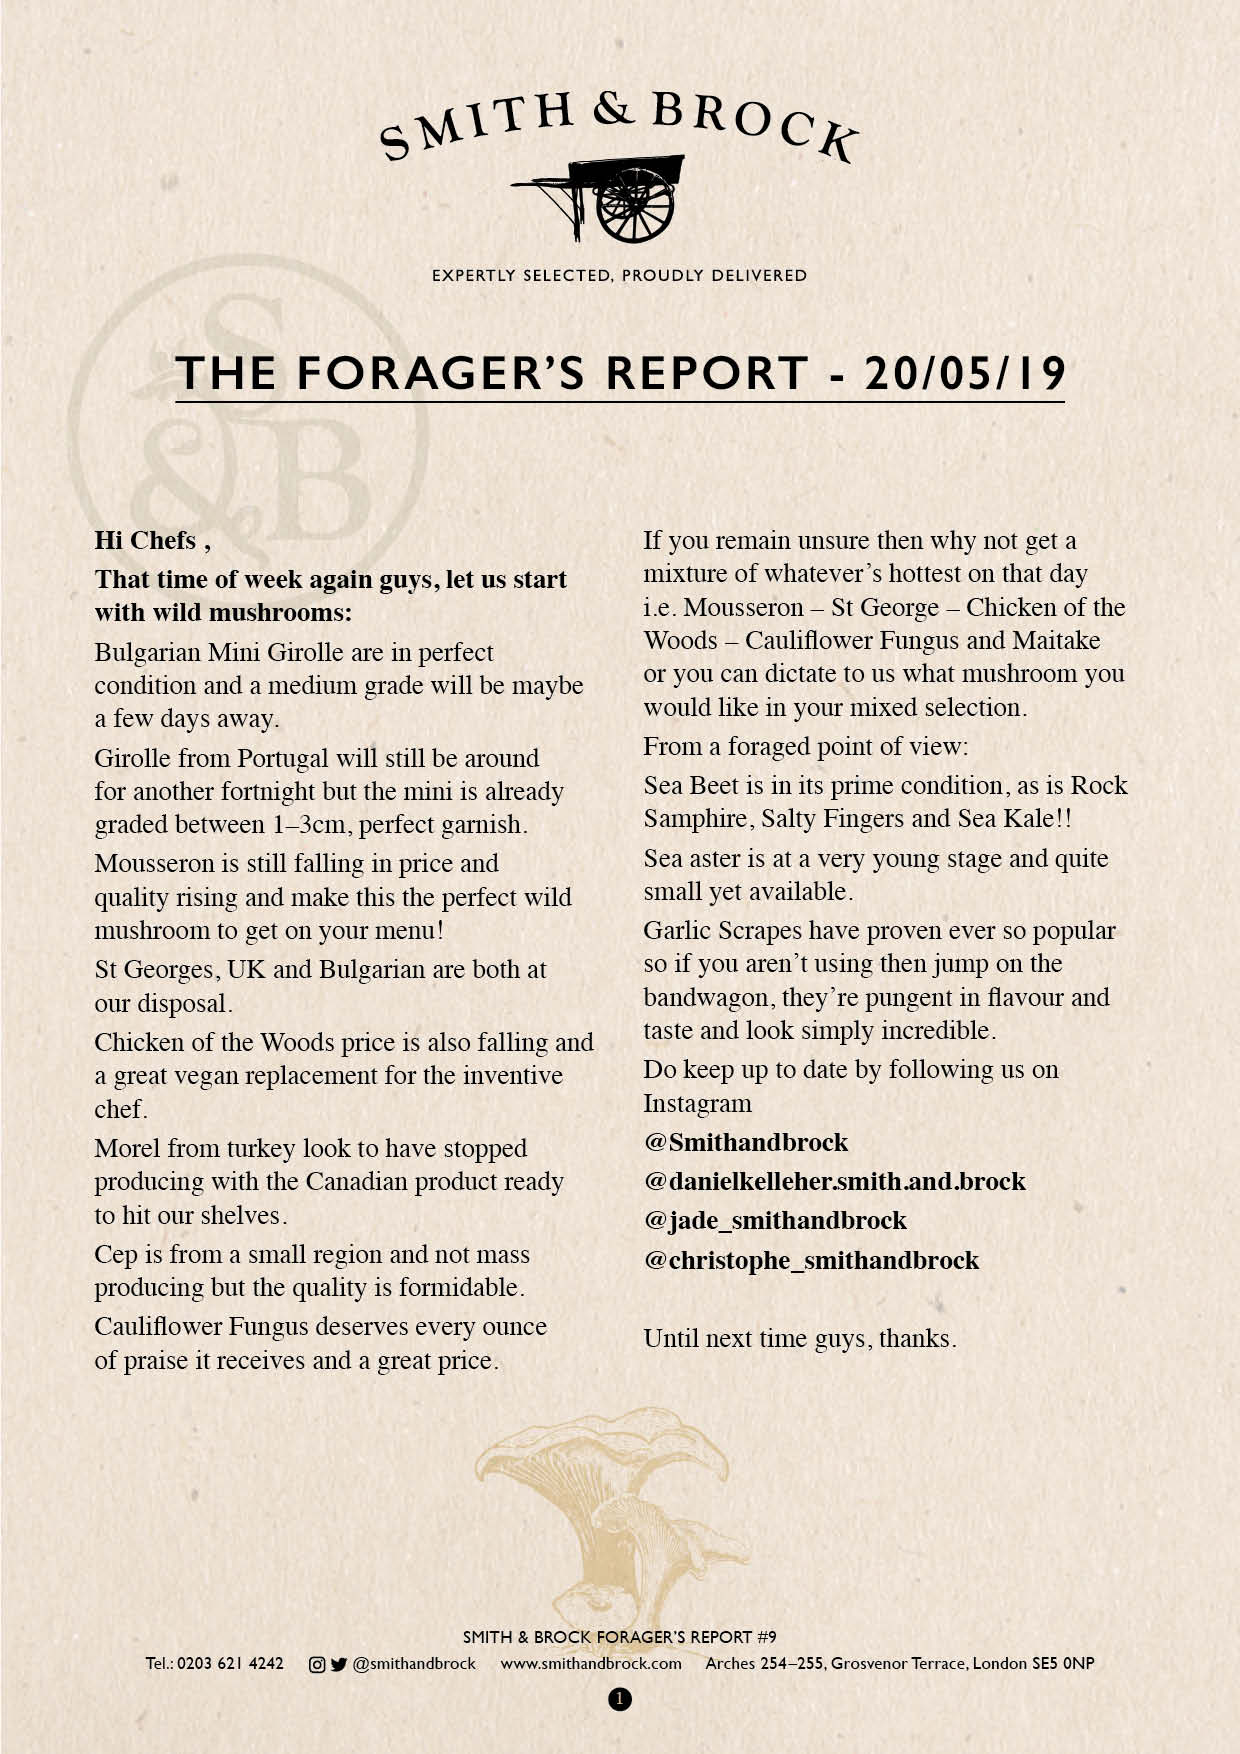 Smith&Brock Foraged Products Report 20 May 2019 #9